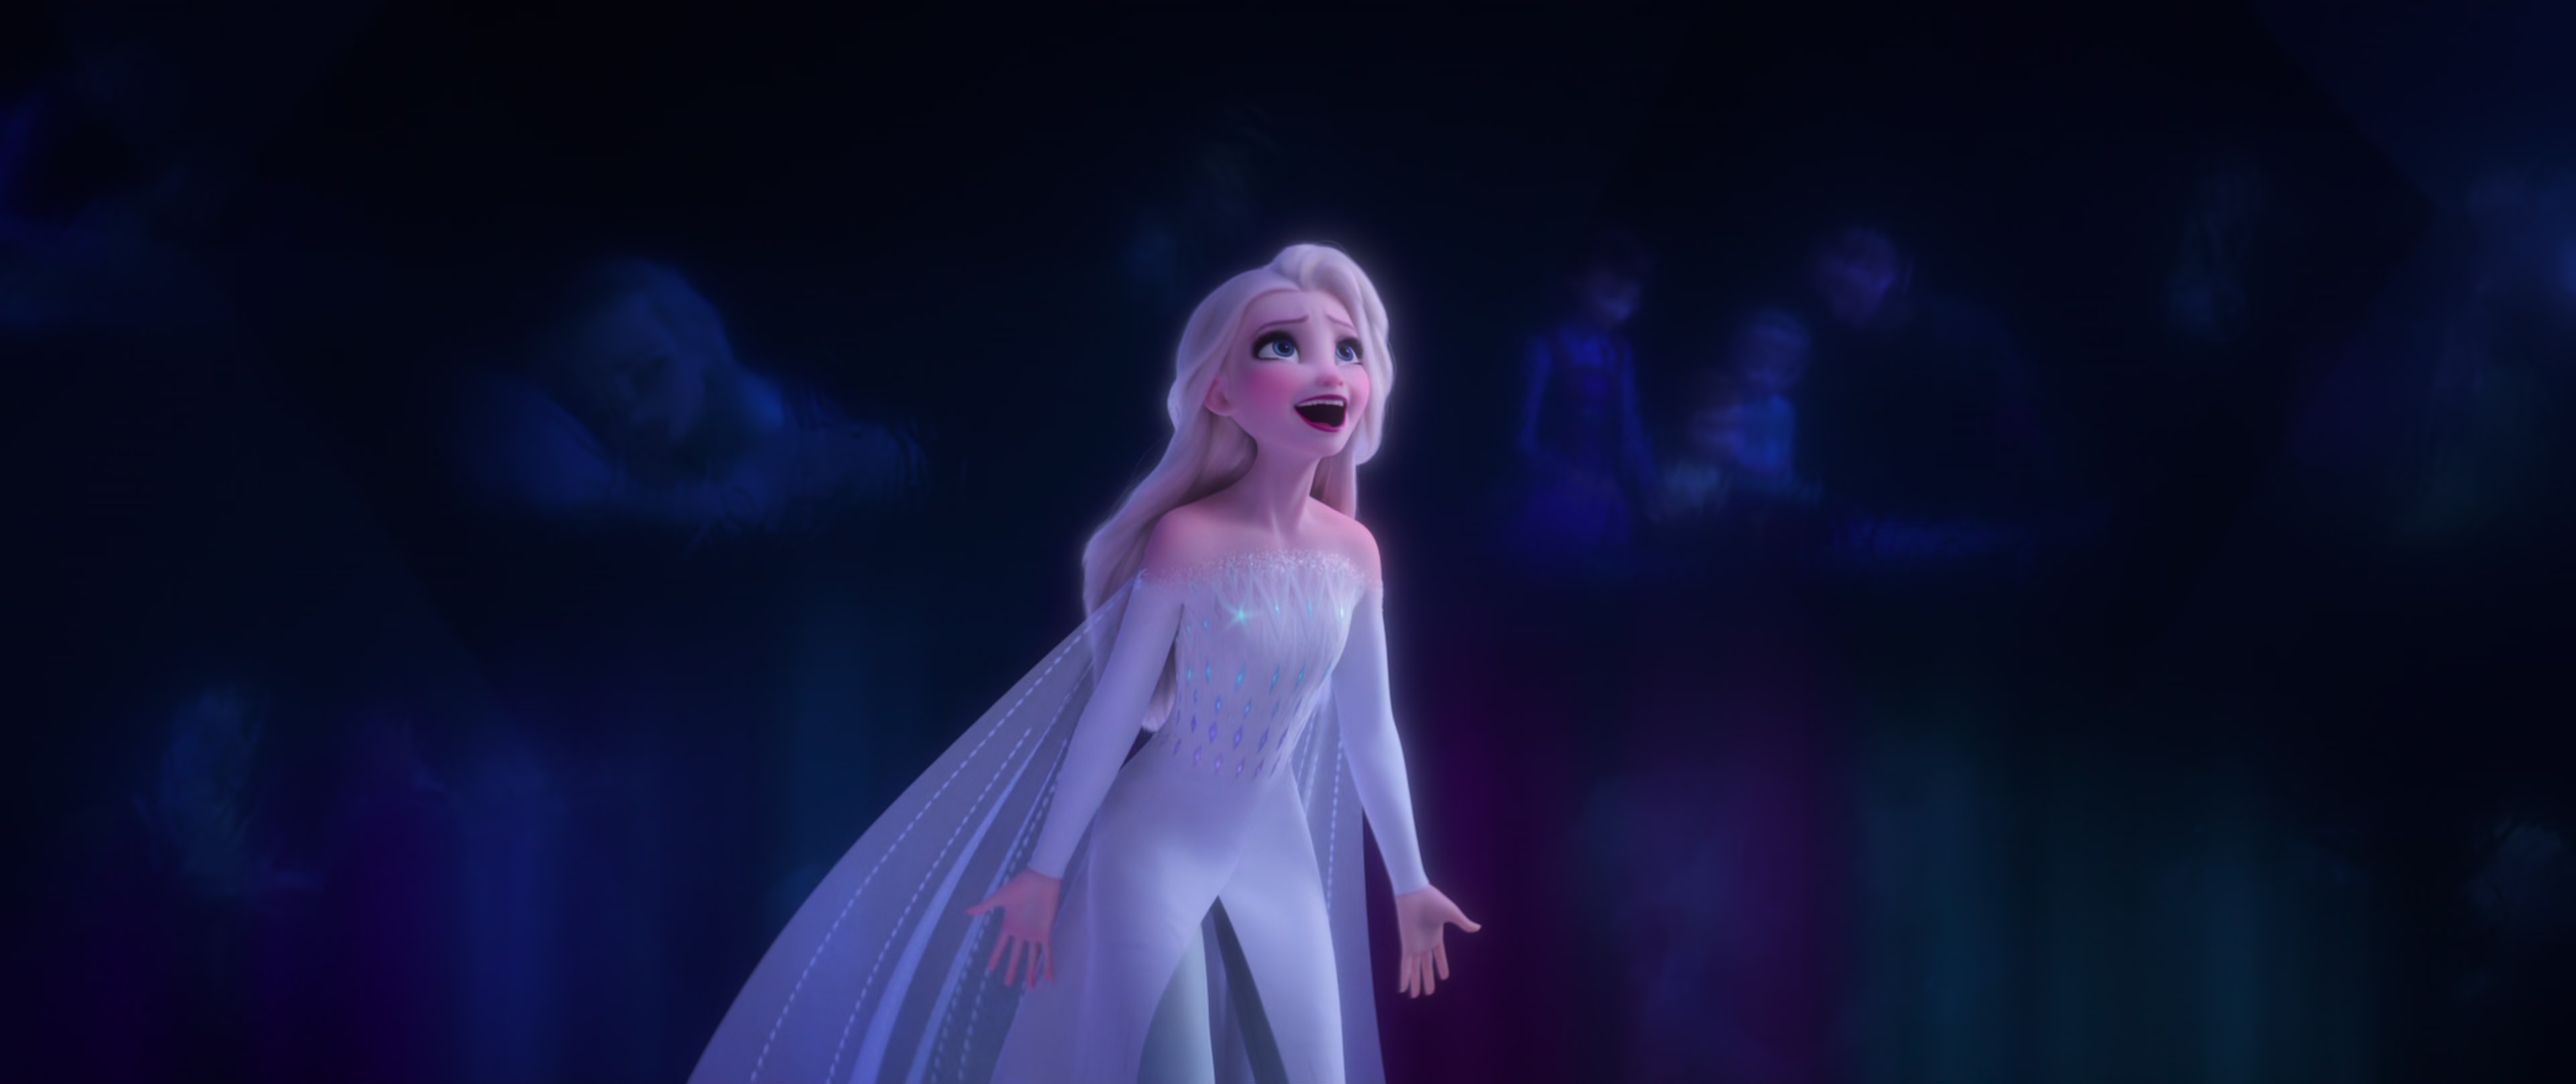 https://static.wikia.nocookie.net/disney/images/a/af/Frozen2elsanewoutfit.jpg/revision/latest?cb=20200319195736